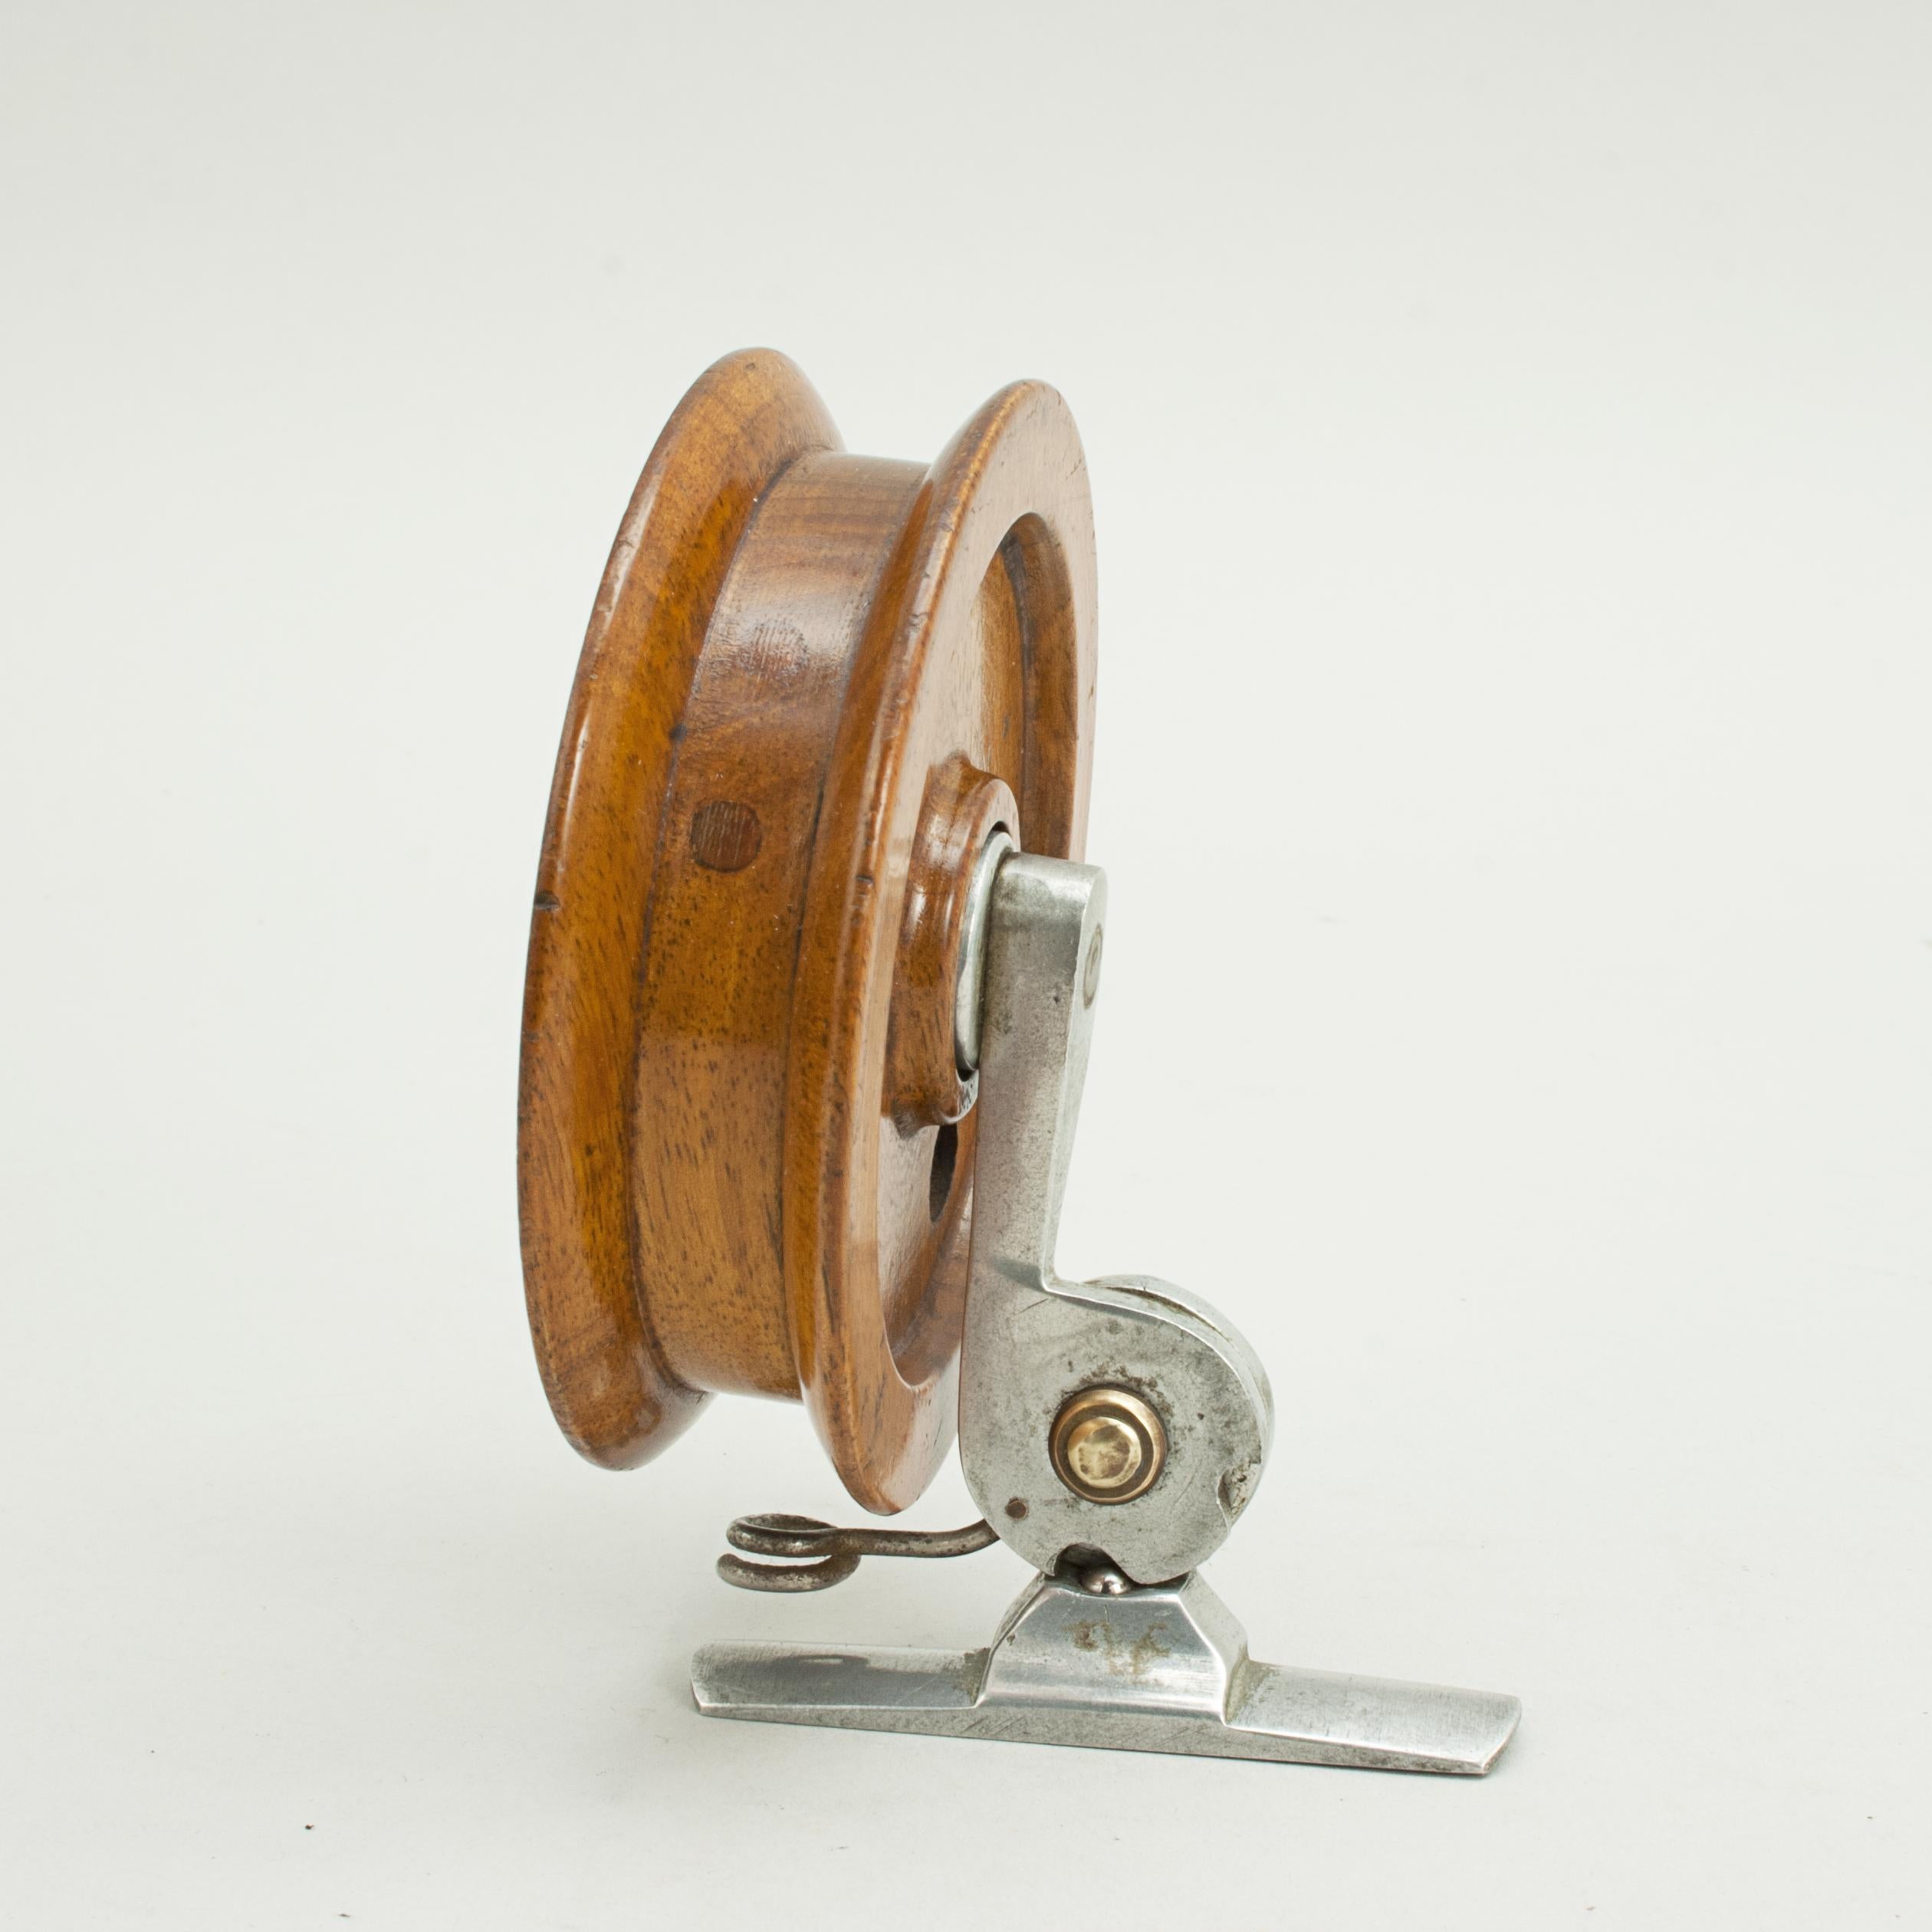 Early 20th Century Brownie Fishing Reel by Millward, 1921 Patent